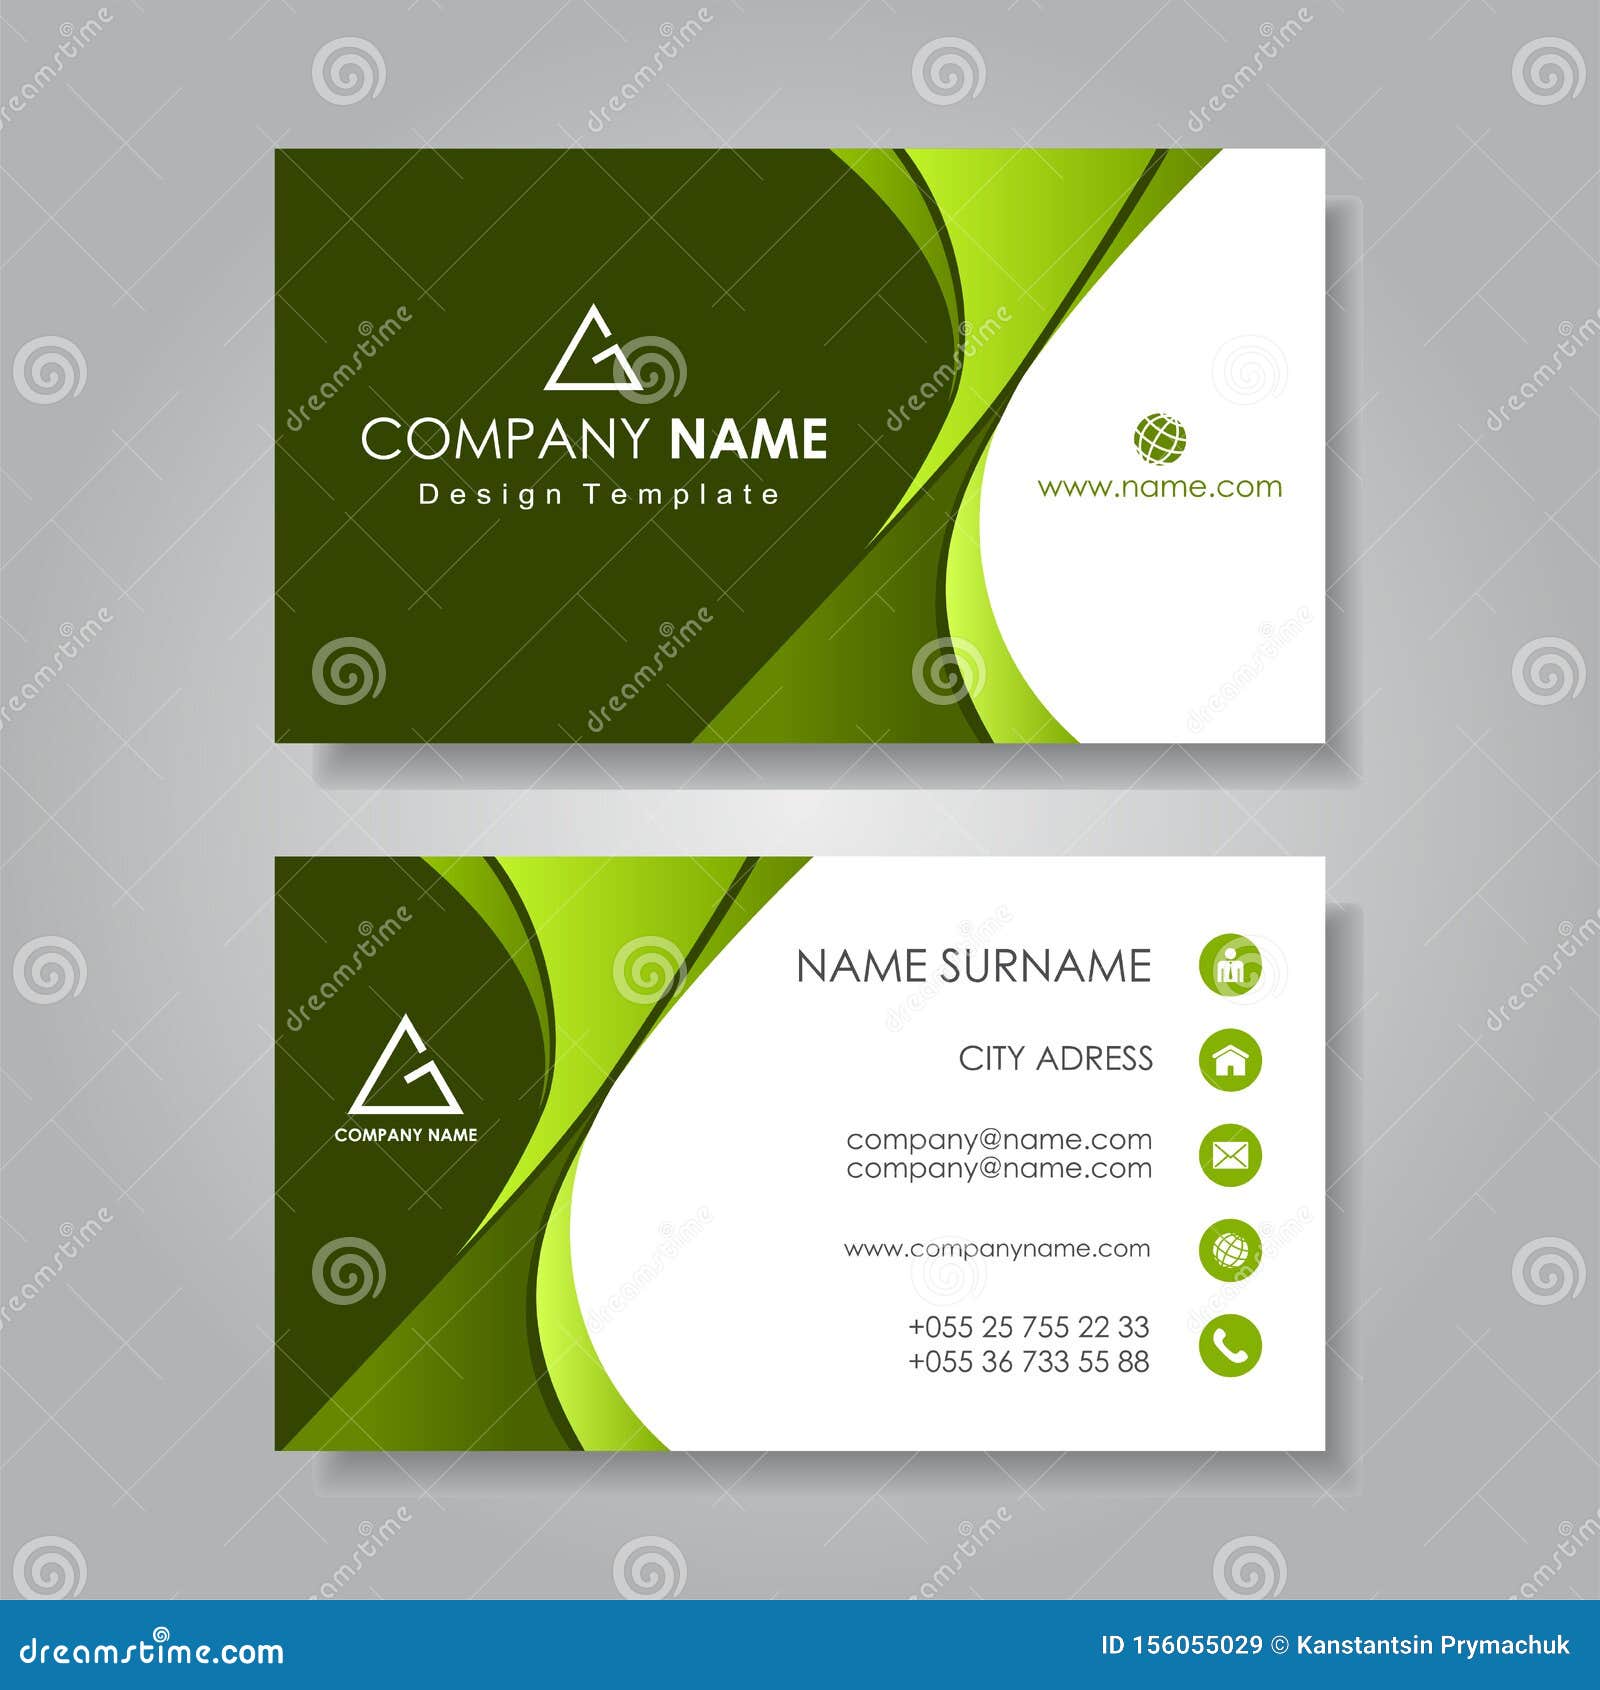 Modern Business Card Template Flat Design. Vector Illustration Intended For Buisness Card Template